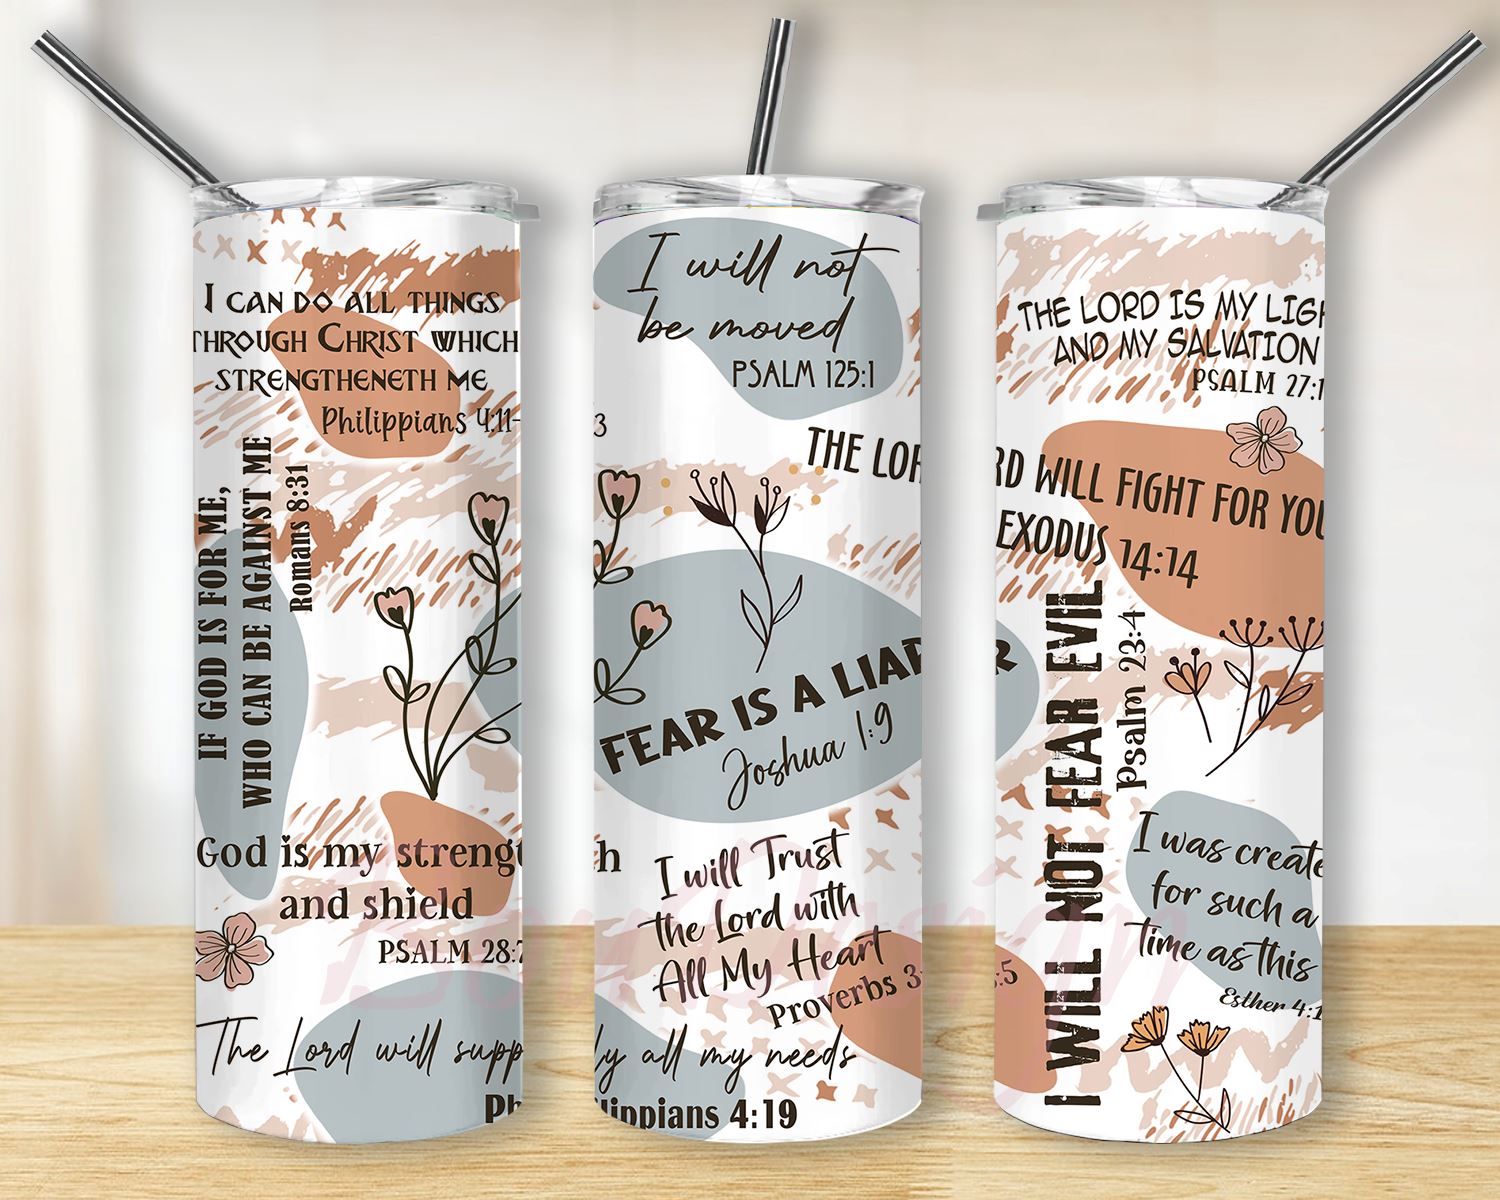 Daily Bible Affirmations UVDTF Cup Wrap – Cositas By Lee